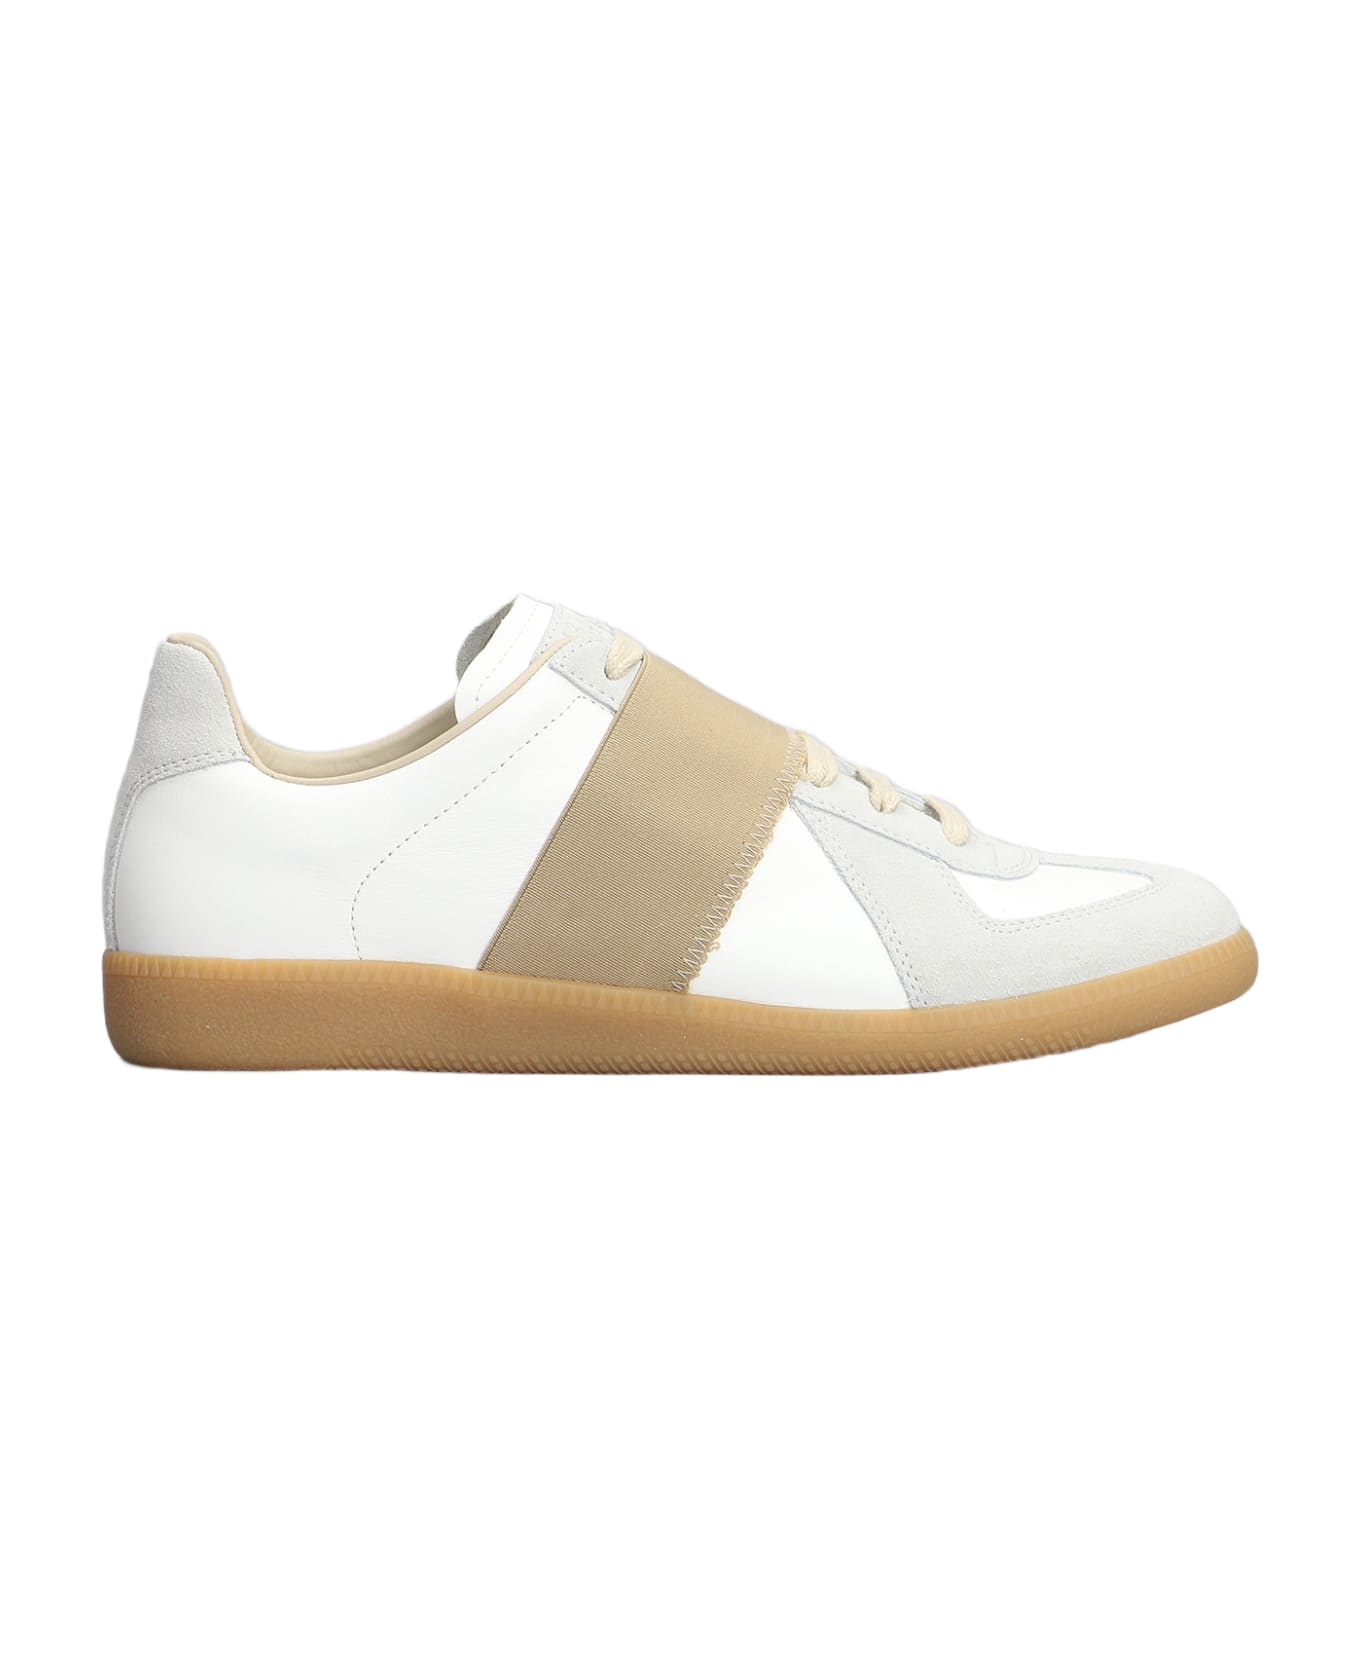 Maison Margiela Replica Sneakers In White Suede And Leather - white